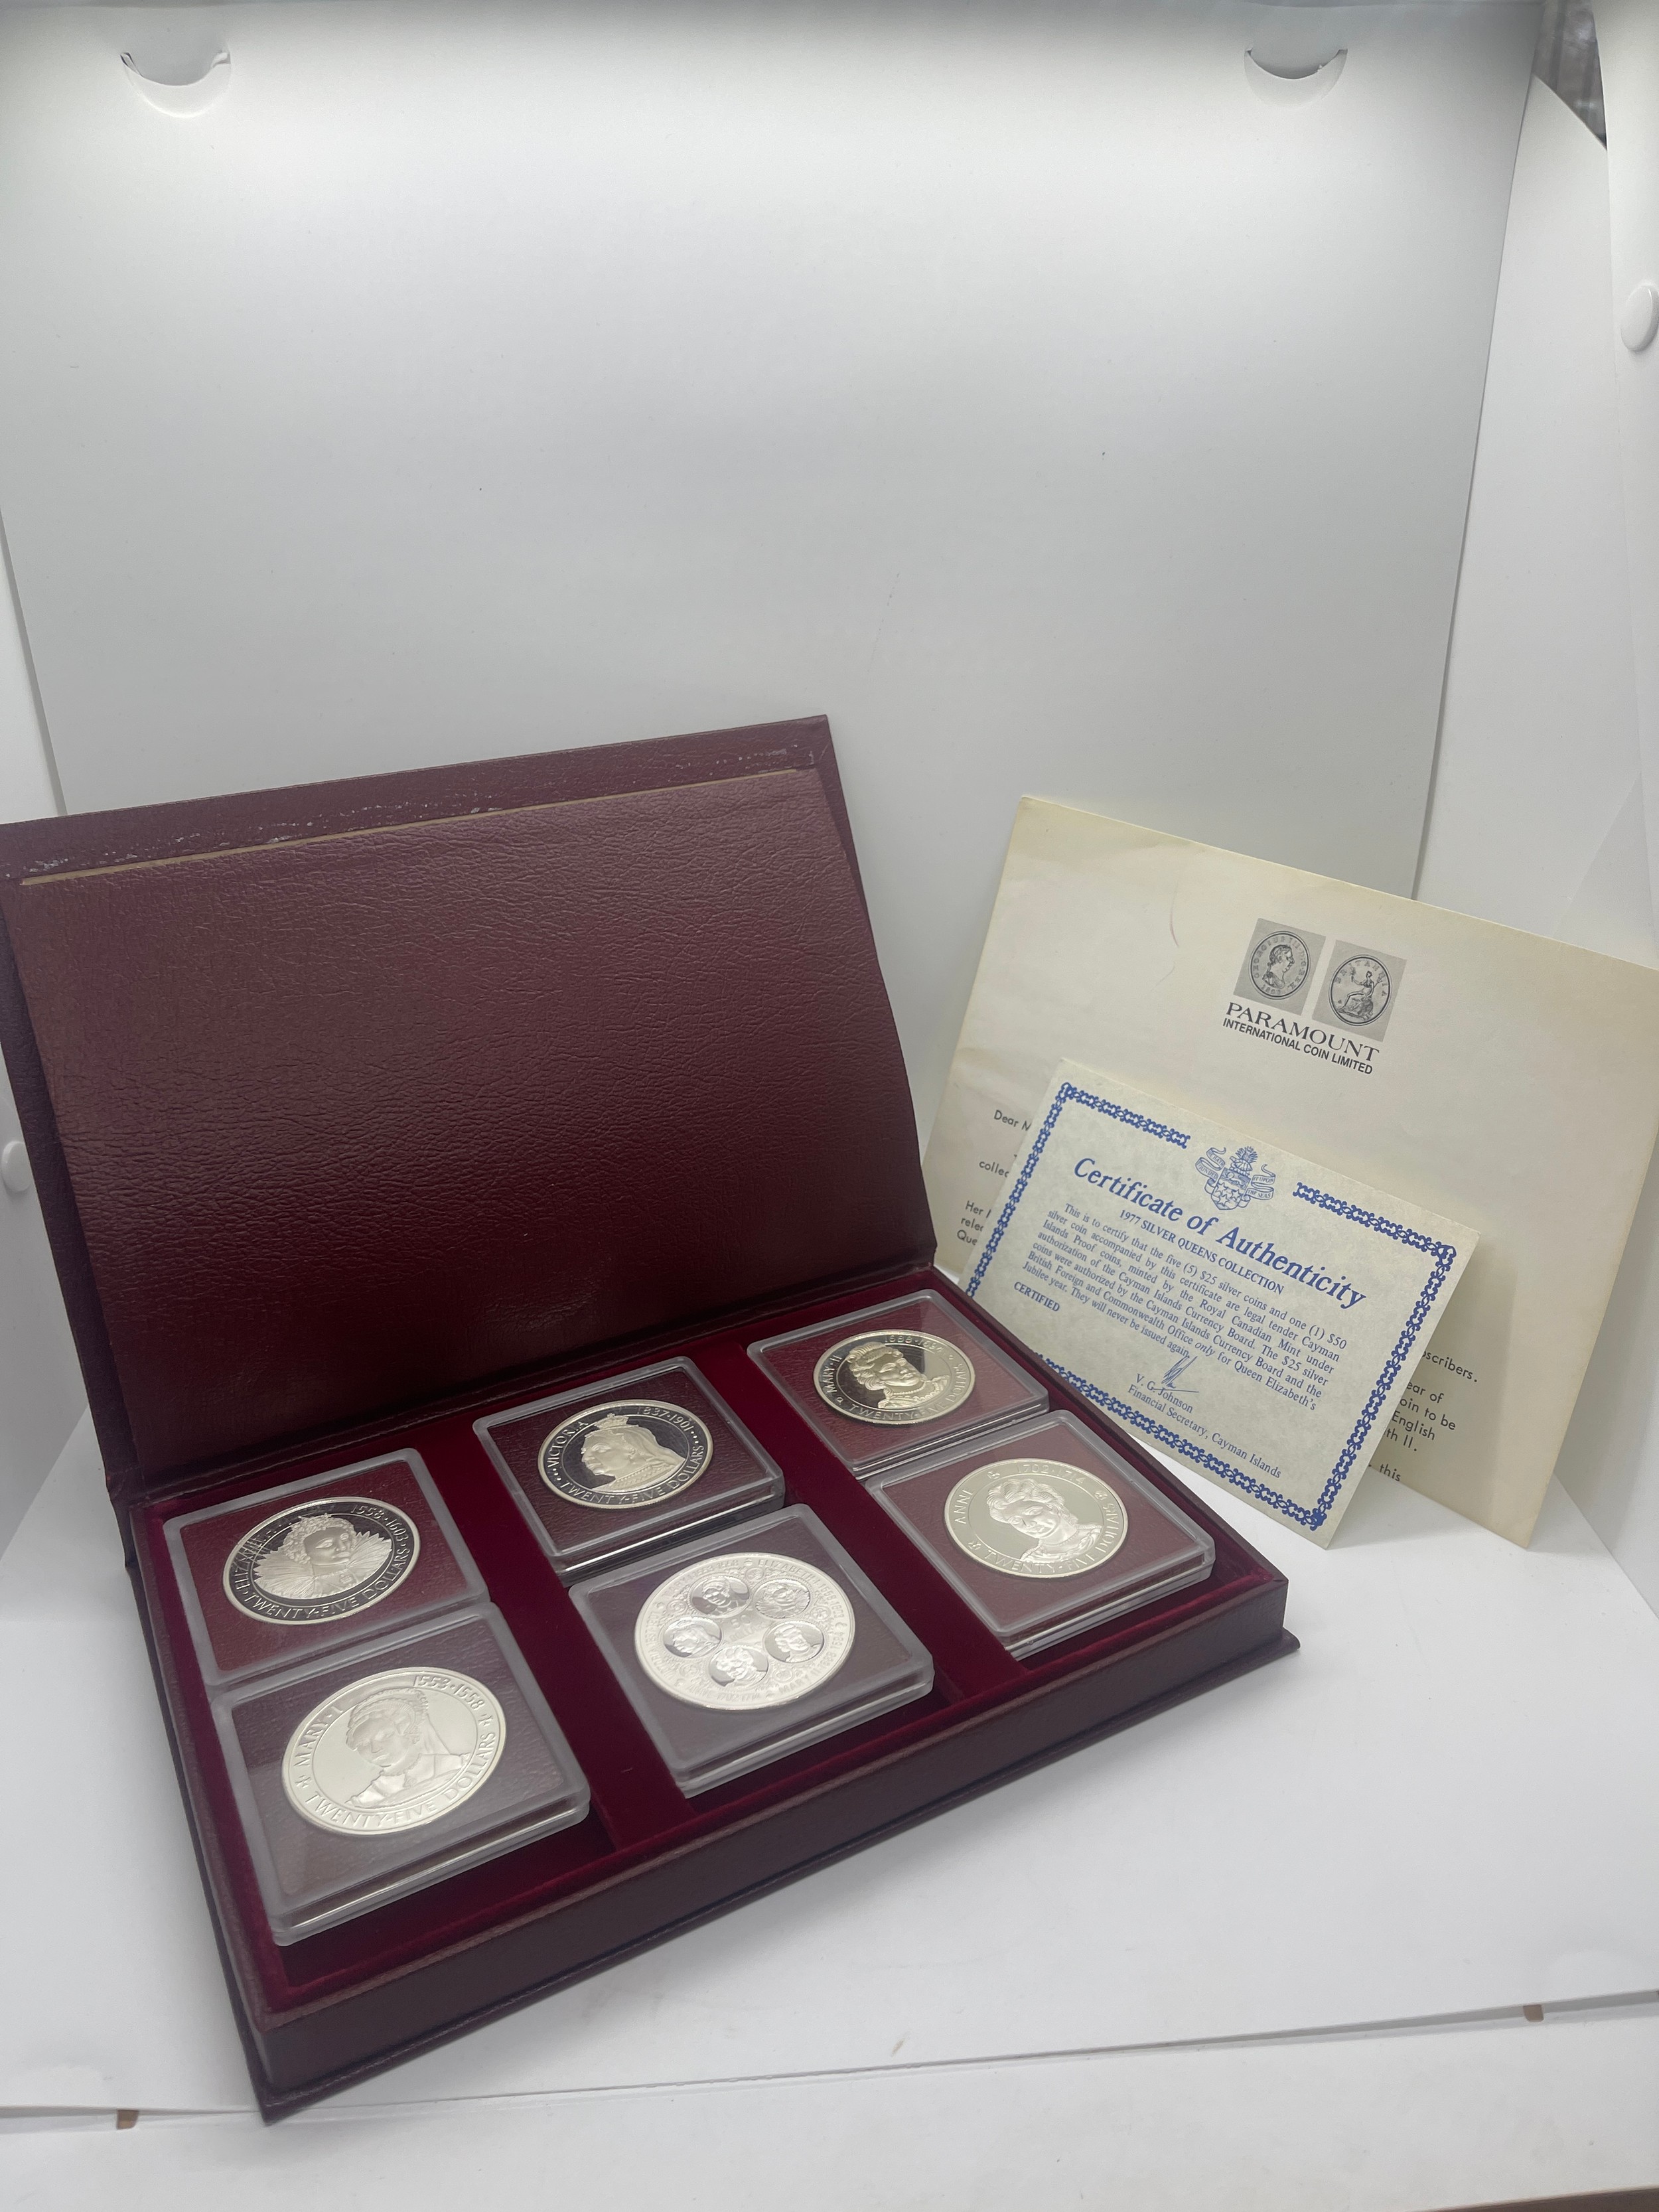 Boxed the Cayman island silver queens collection 1977 coin set with COA